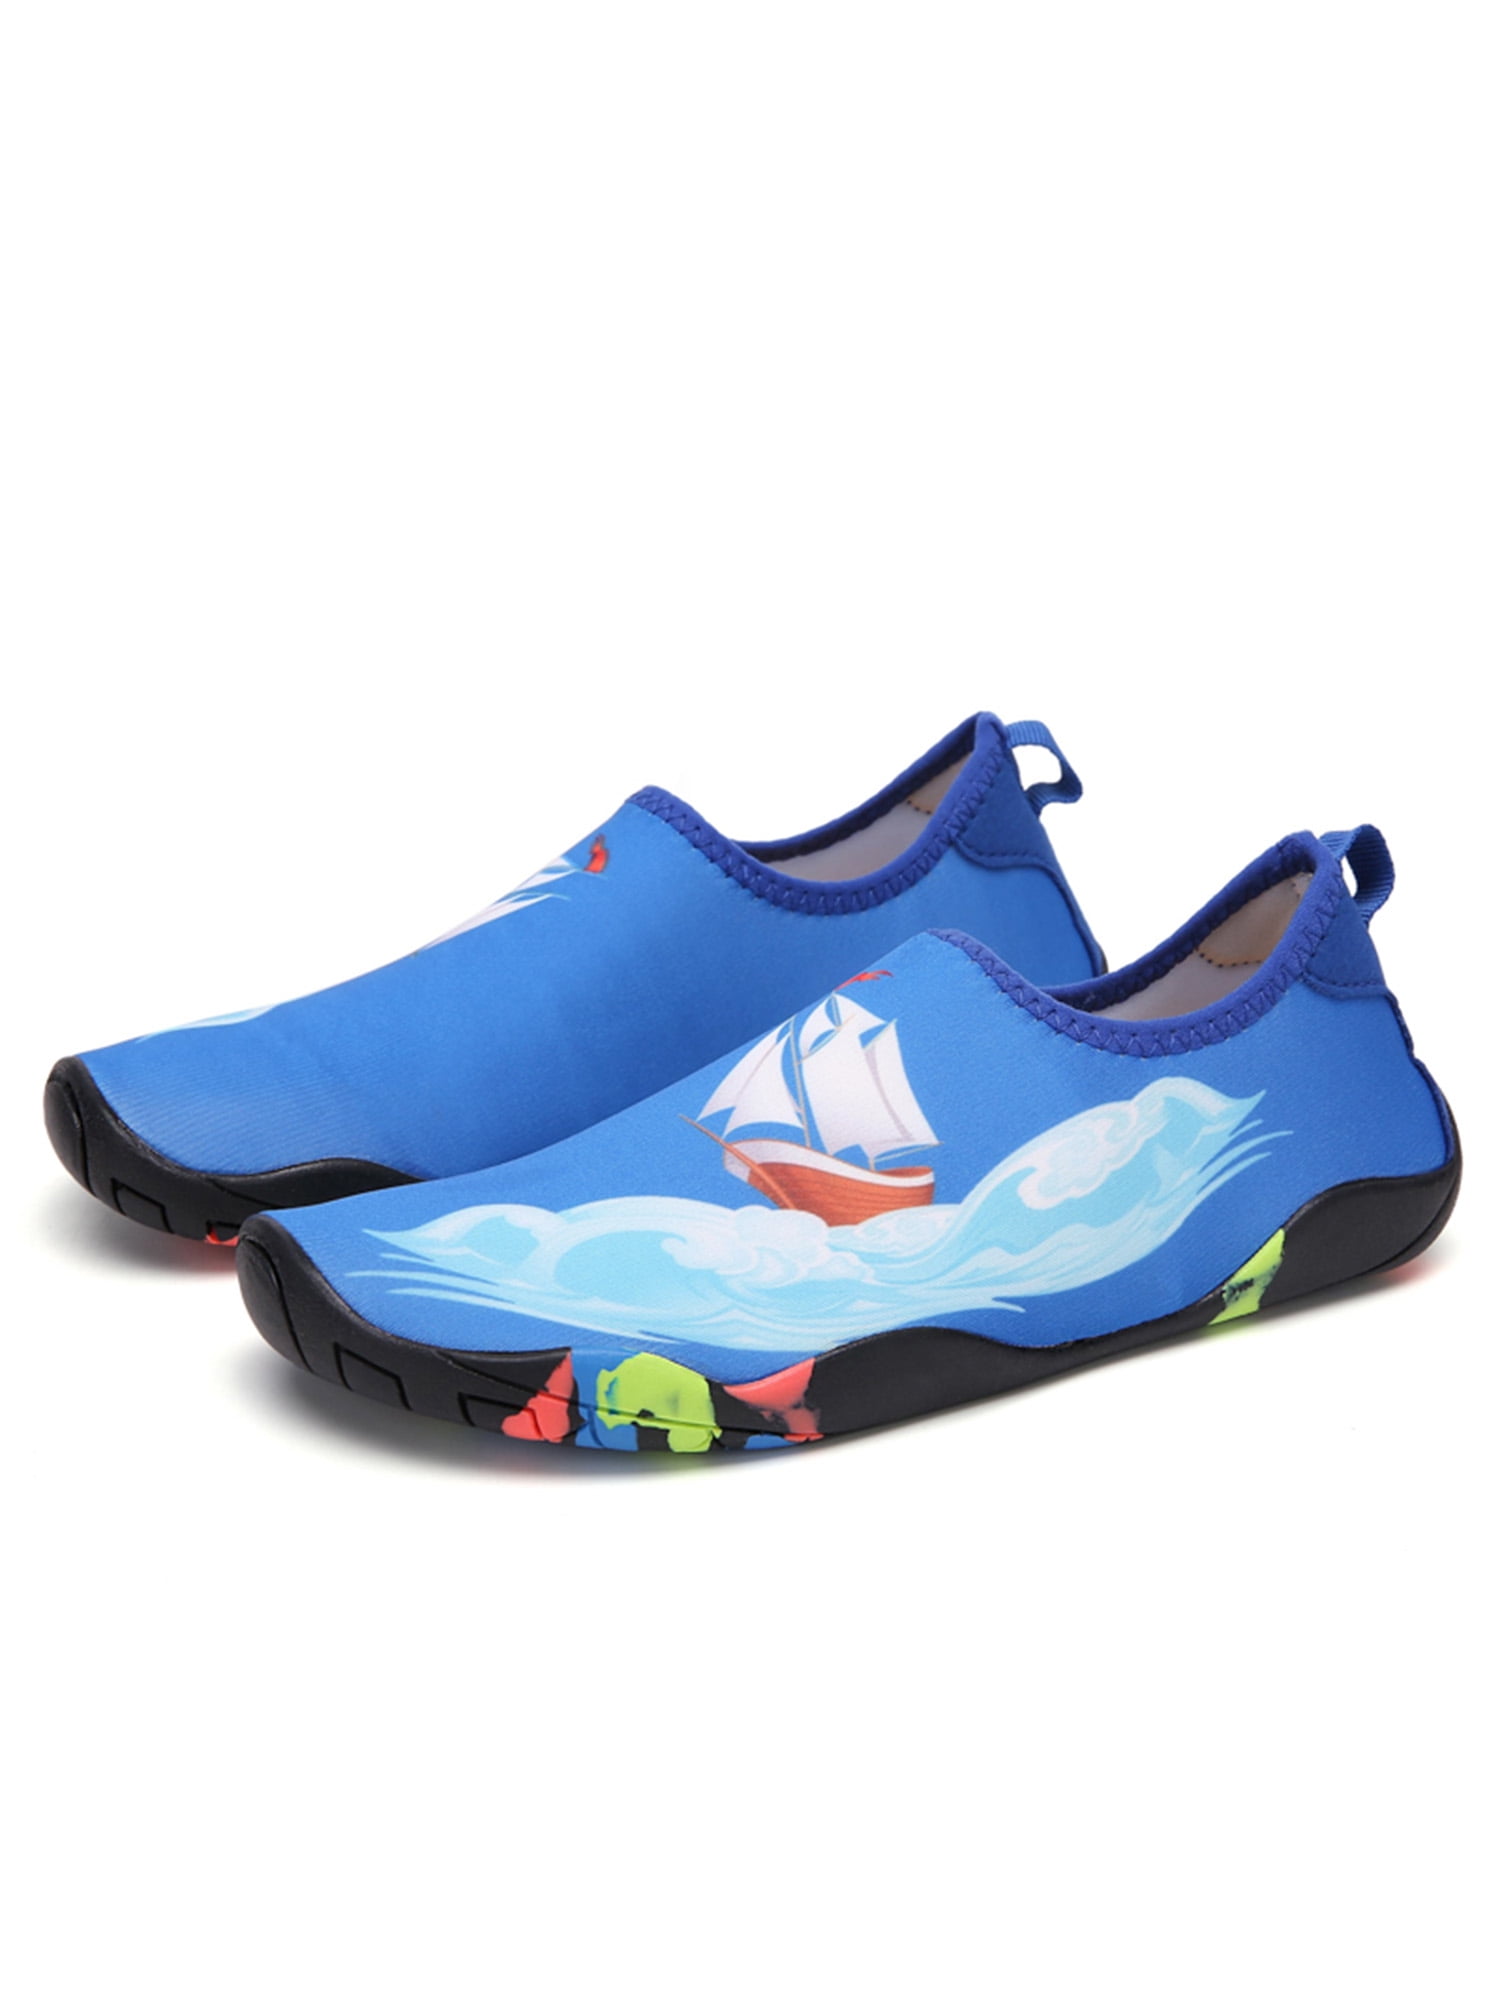 Anti-Slip Water Sports Shoes Diving Swimming Surfing Beach Shoe for Couples 